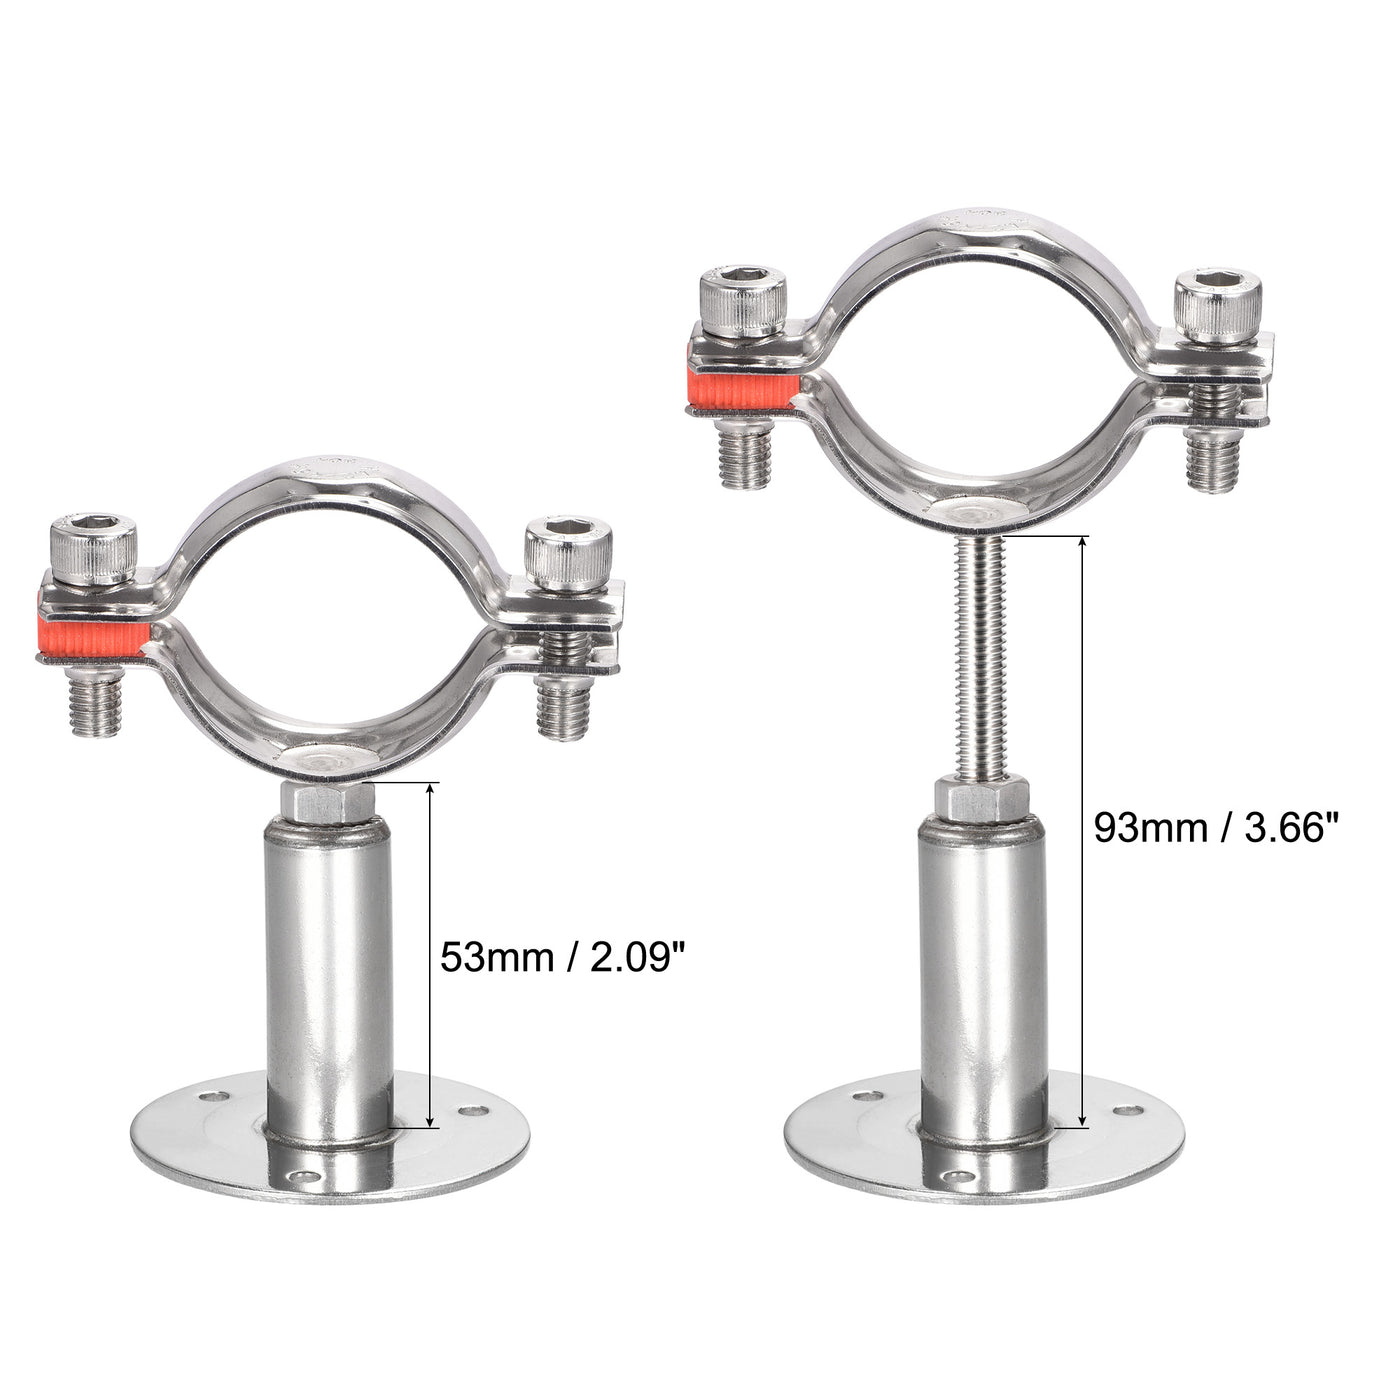 Uxcell Uxcell Wall Mount Ceiling Mount Pipe Support, 304 Stainless Steel Adjustable Pipe Bracket Clamp for 25-28mm Pipe 2pcs